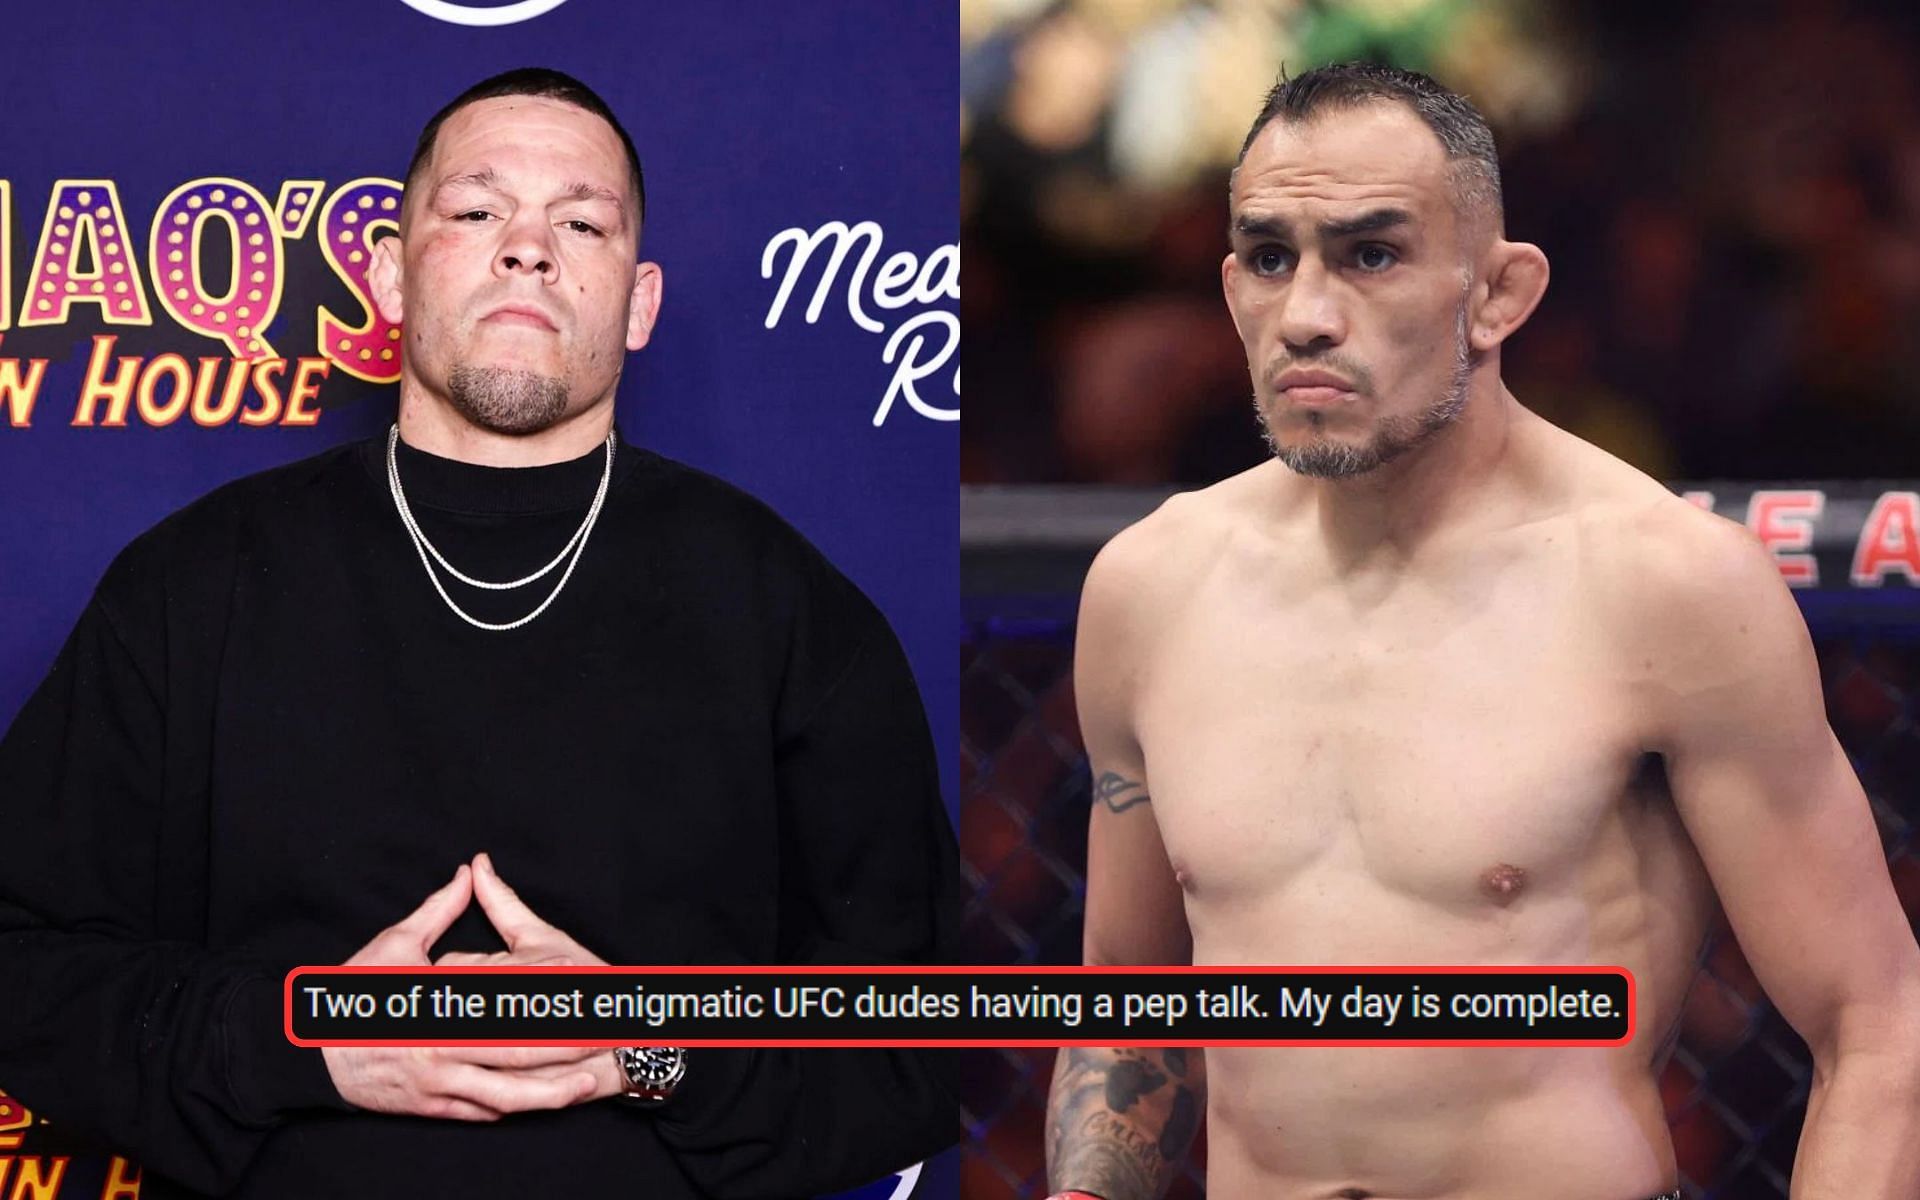 Nate Diaz and Tony Ferguson caught up at a combat event